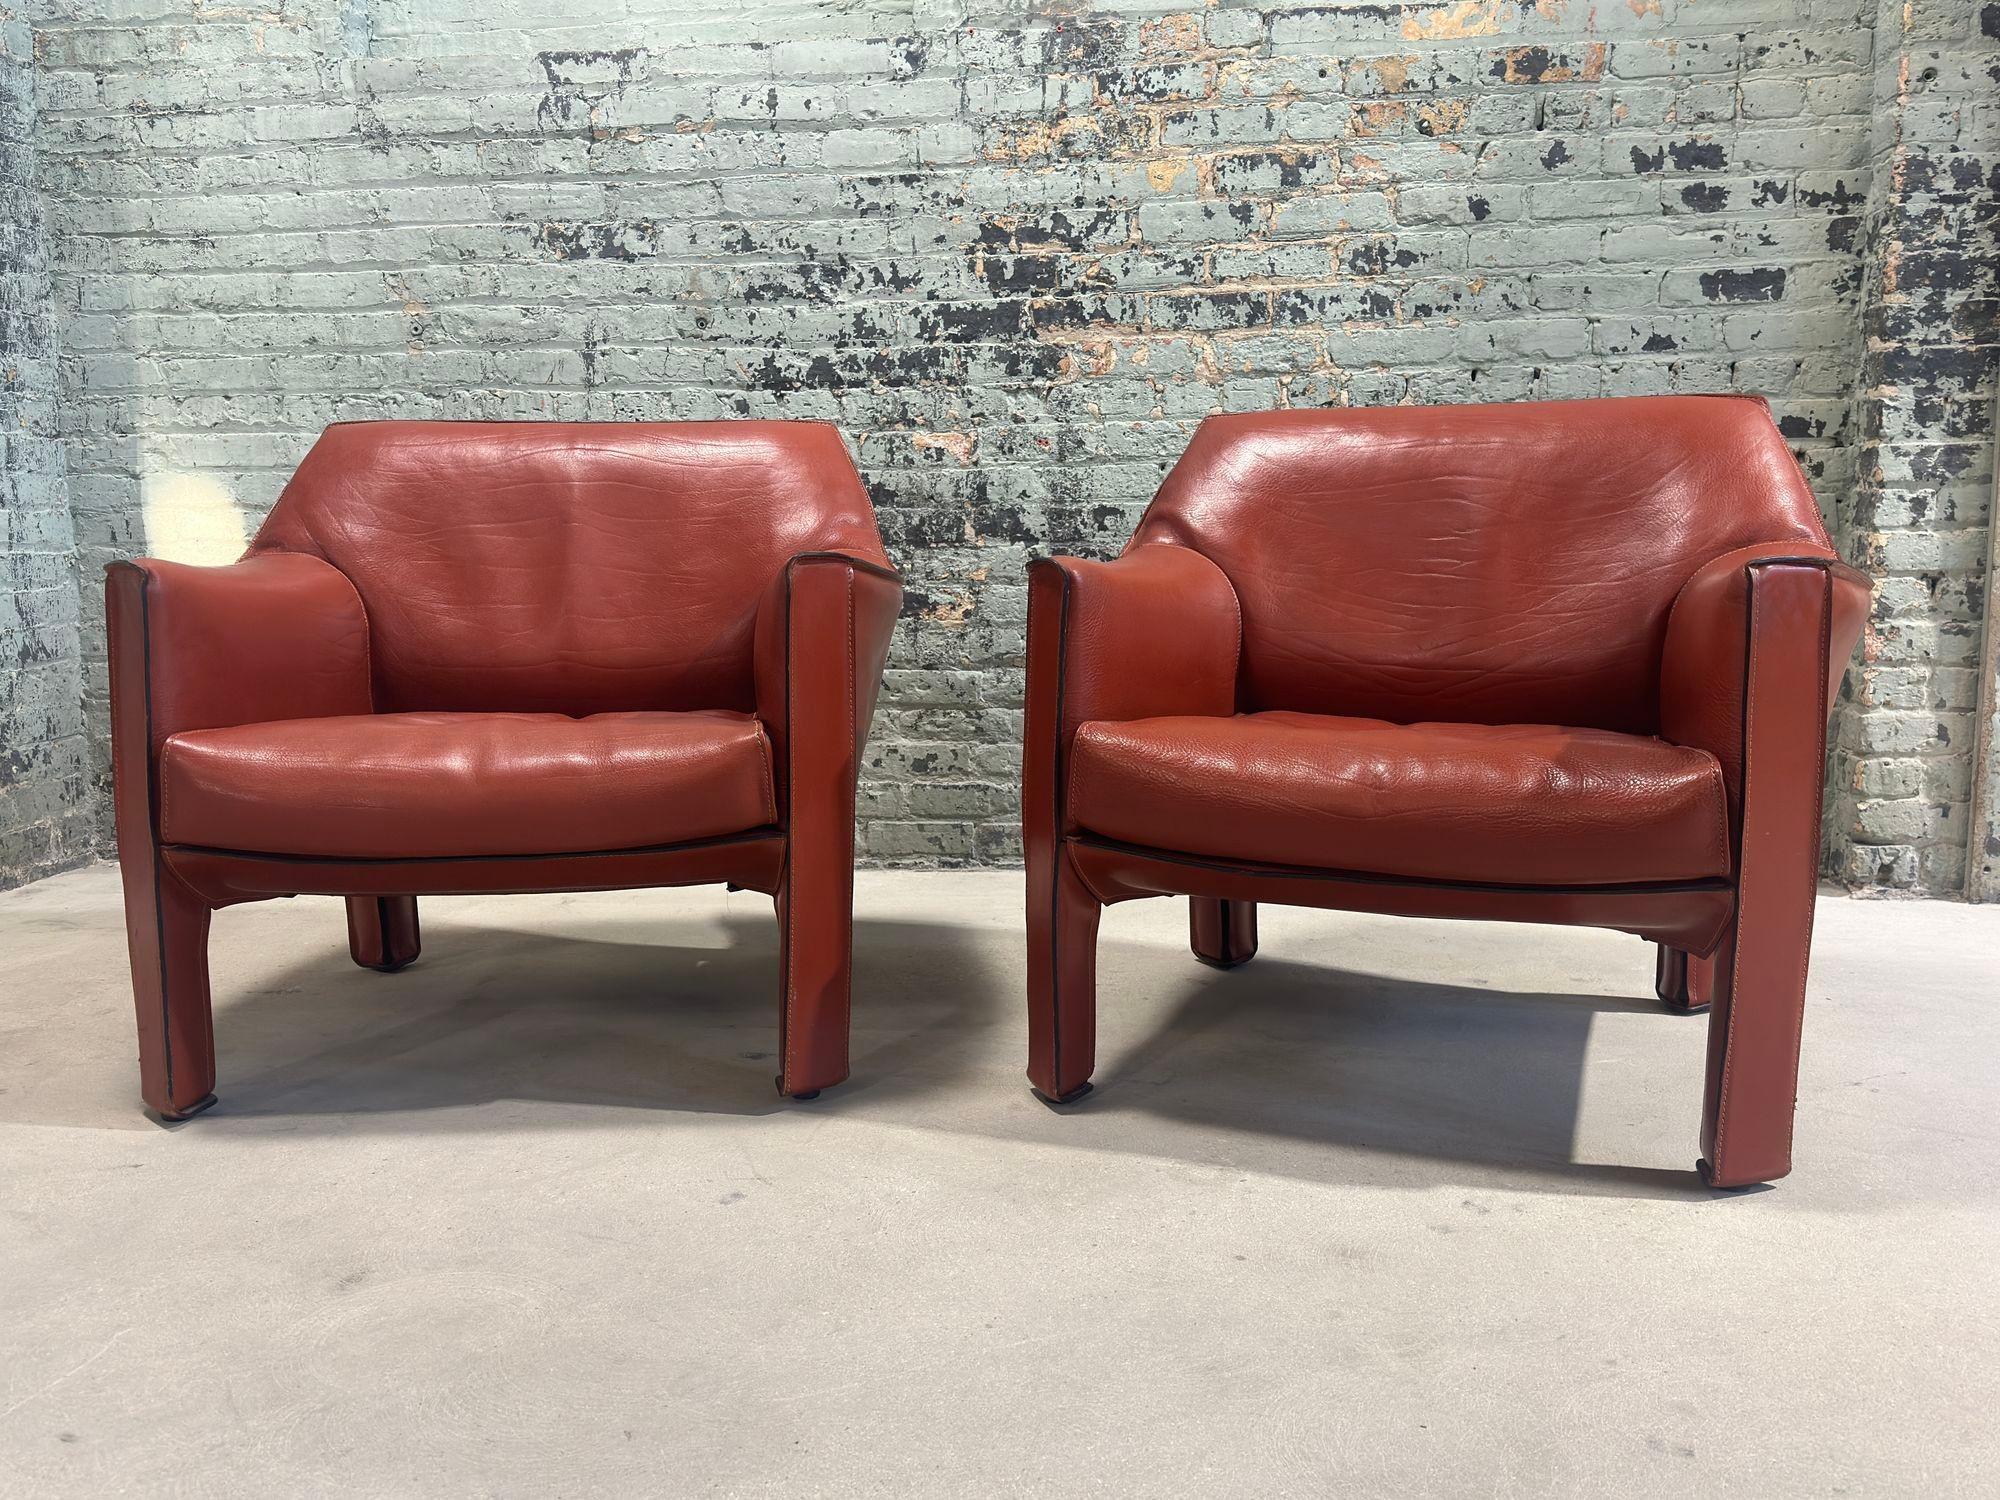 Mario Bellini Pair Leather Cab Lounge Chairs, Model 415, Italy 1970's. Excellent original condition. Constructed of welded steel frames.
Chairs are designed by Mario Bellini for Cassina, Italy.